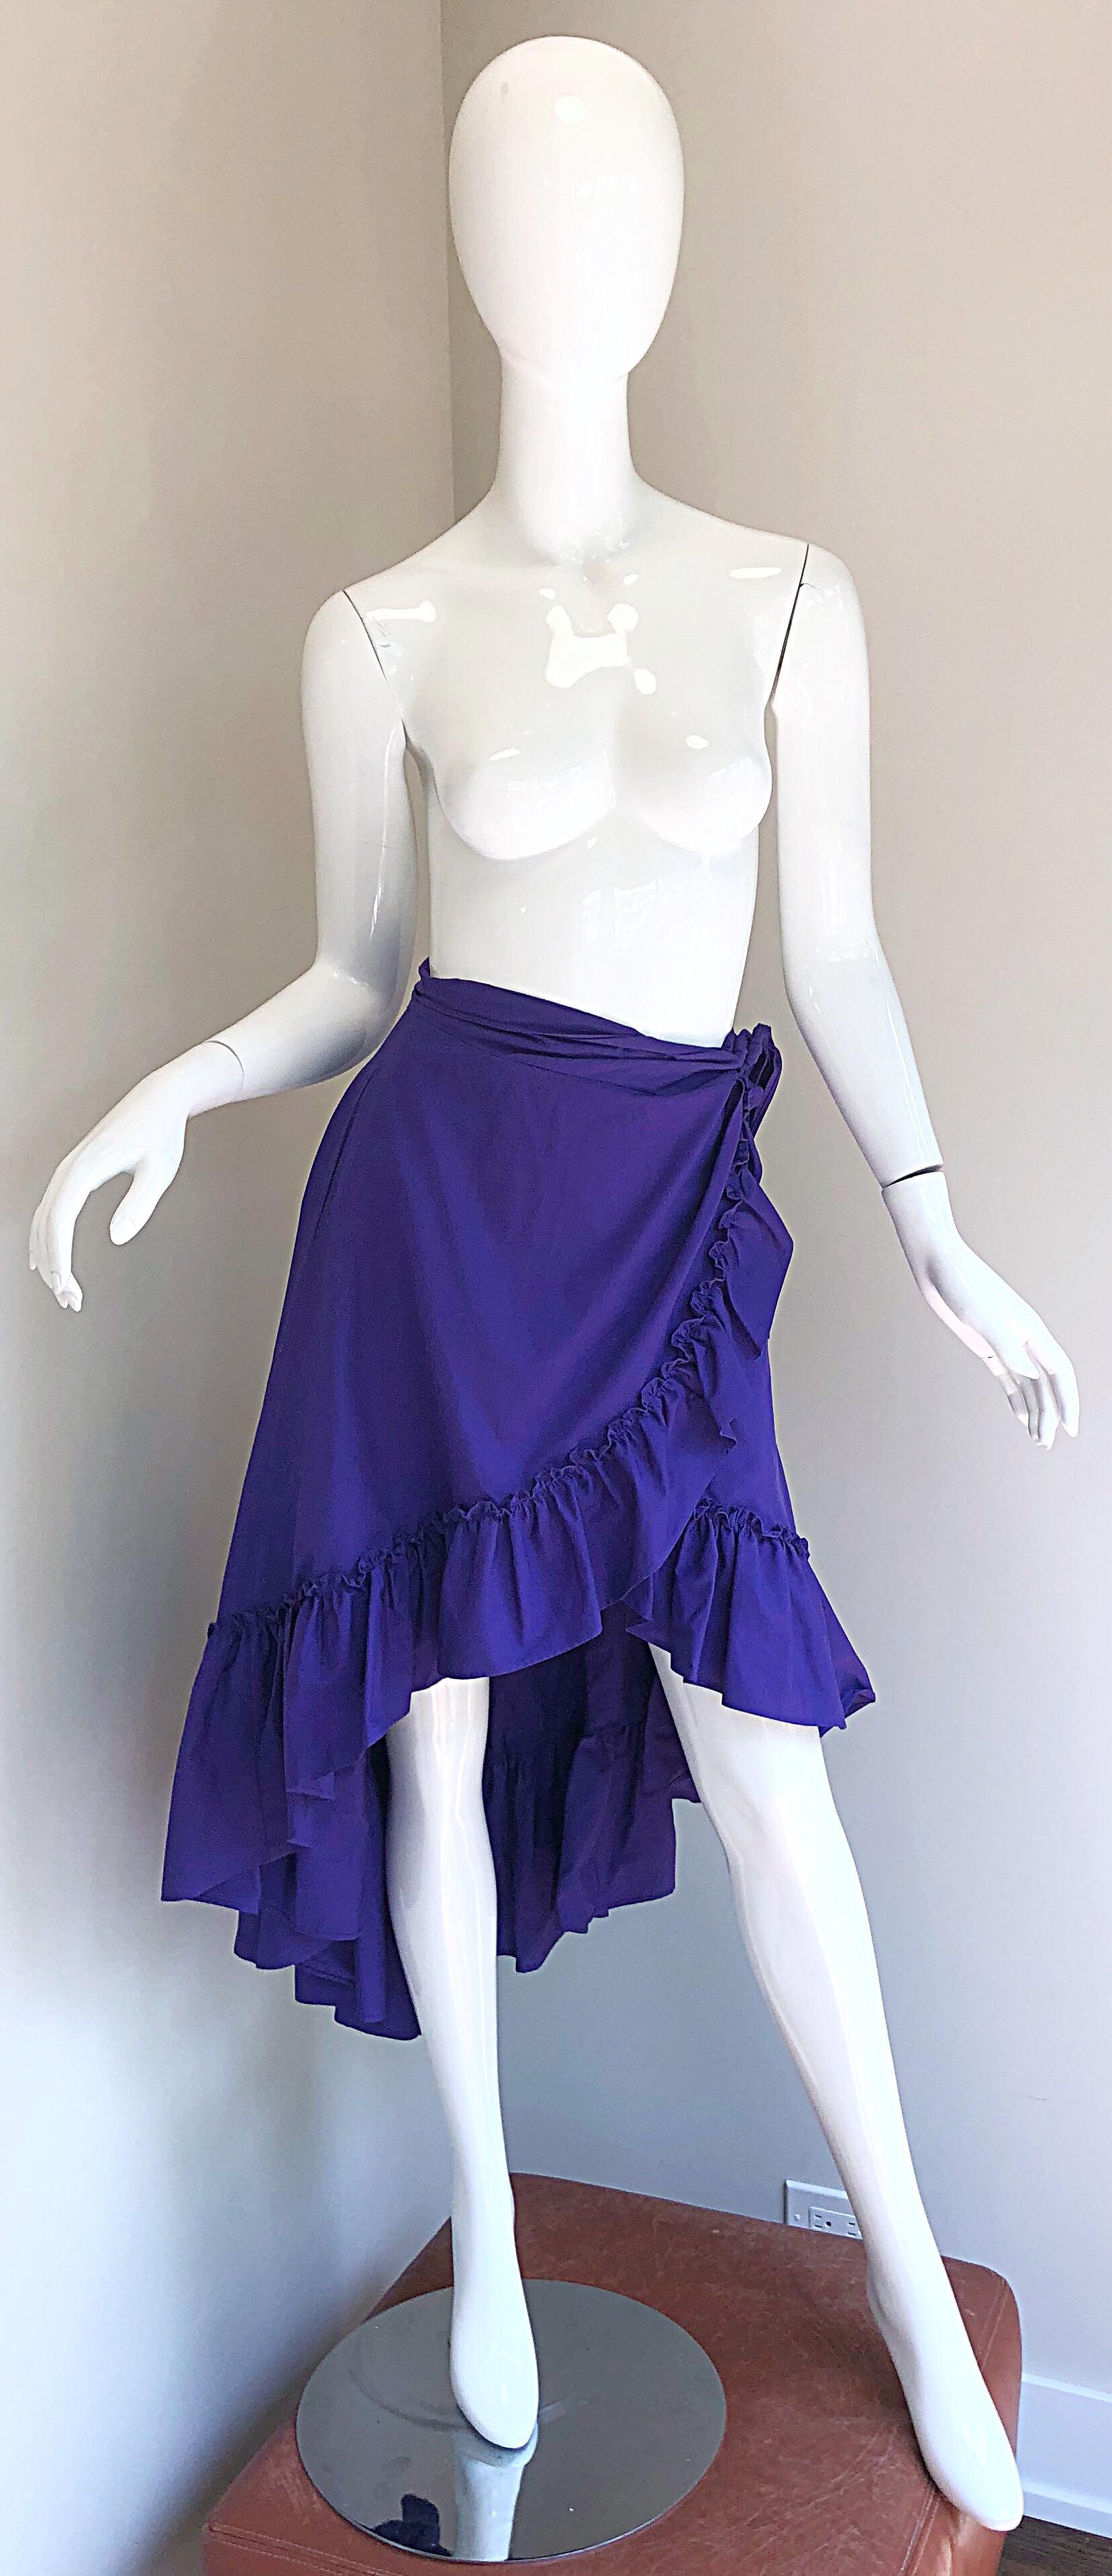 Incredible vintage 1980s EMMANUELLE KHANH purple cotton flamenco style wrap skirt! Features a ruffled hem that is shorter in the front and longer in the back. POCKET at right waist. Hidden button closure and ties at the left waist. Can easily be